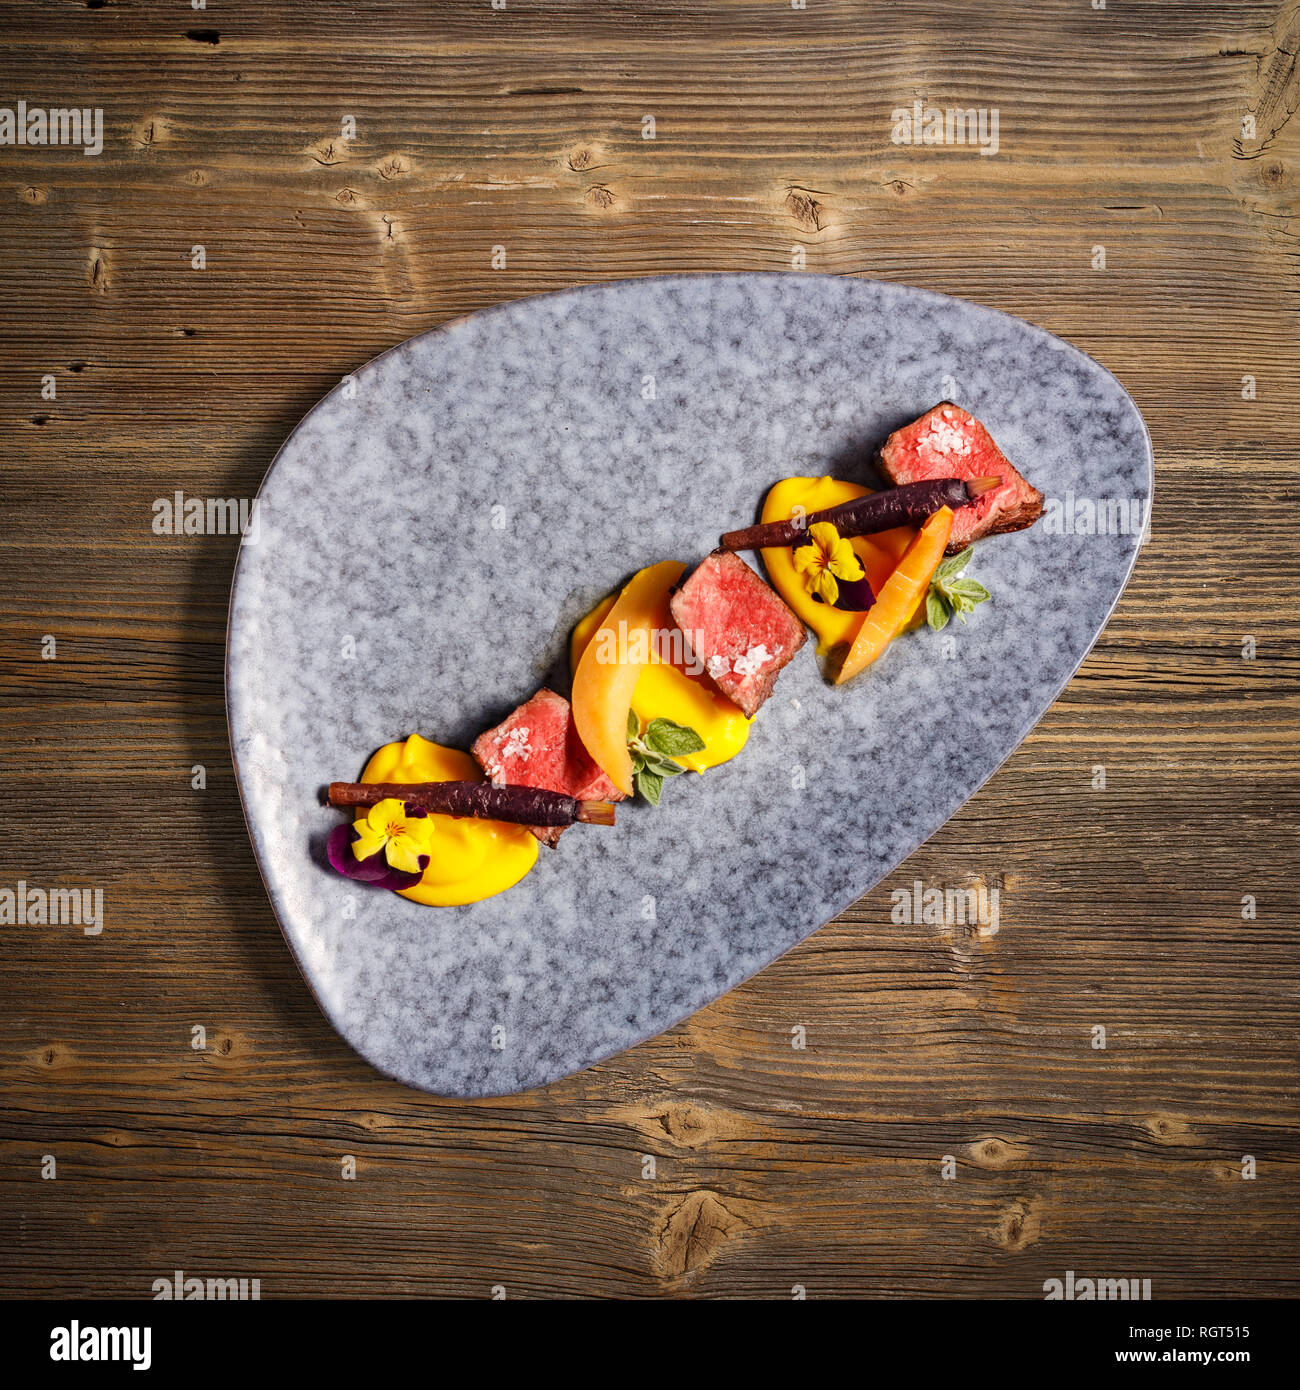 Flat lay of deer sirloin with mashed sweet potatoes on wooden background Stock Photo